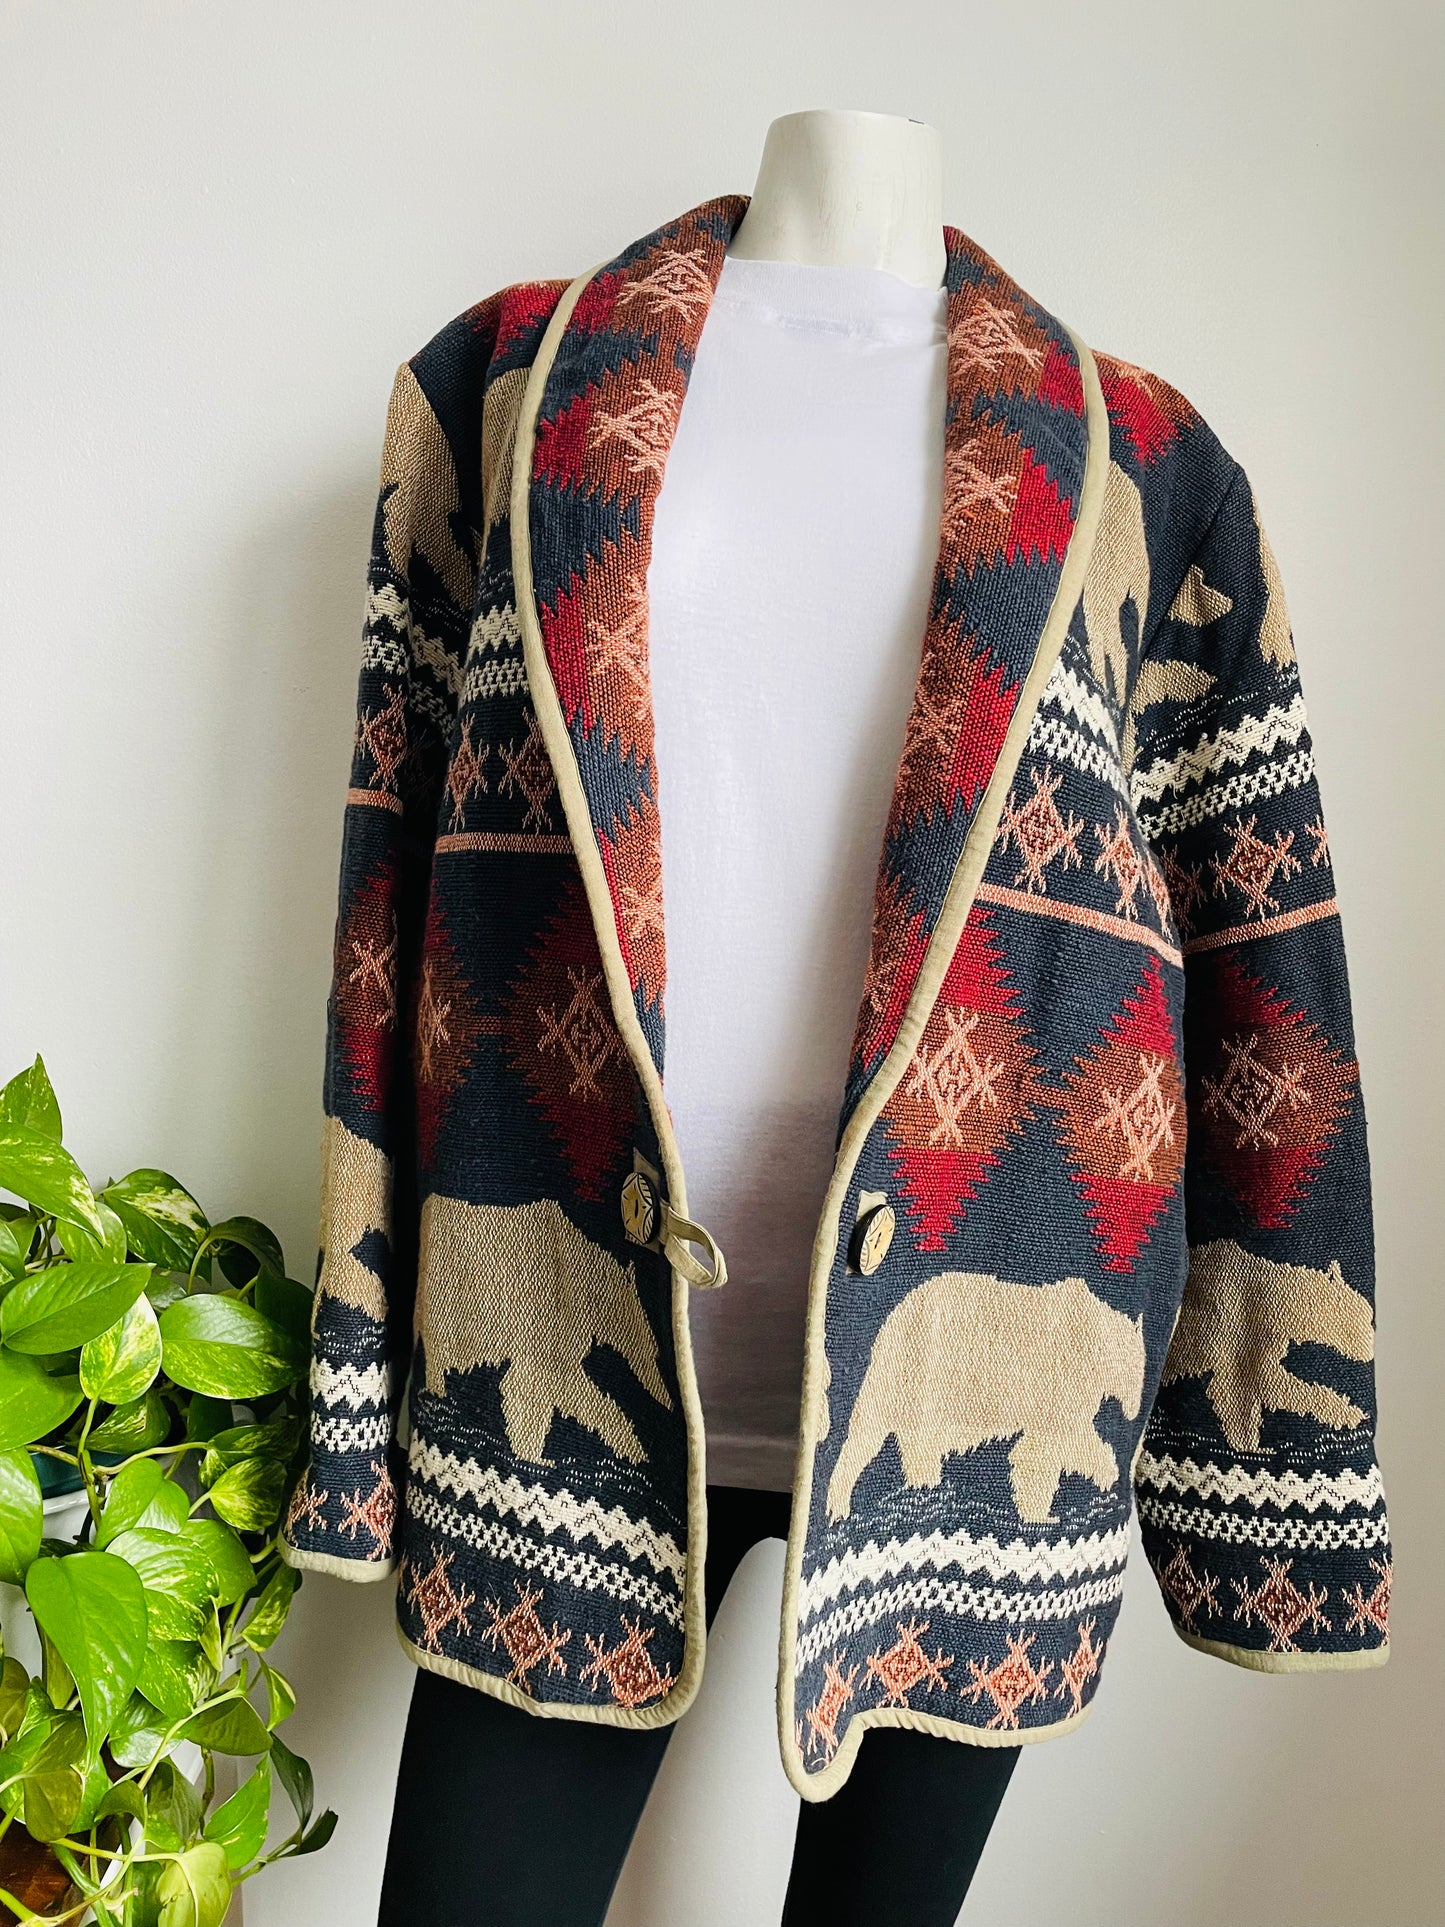 Flashback Tapestry Fabric Jacket with Grizzly Bear Design - 100% Cotton - Made in India